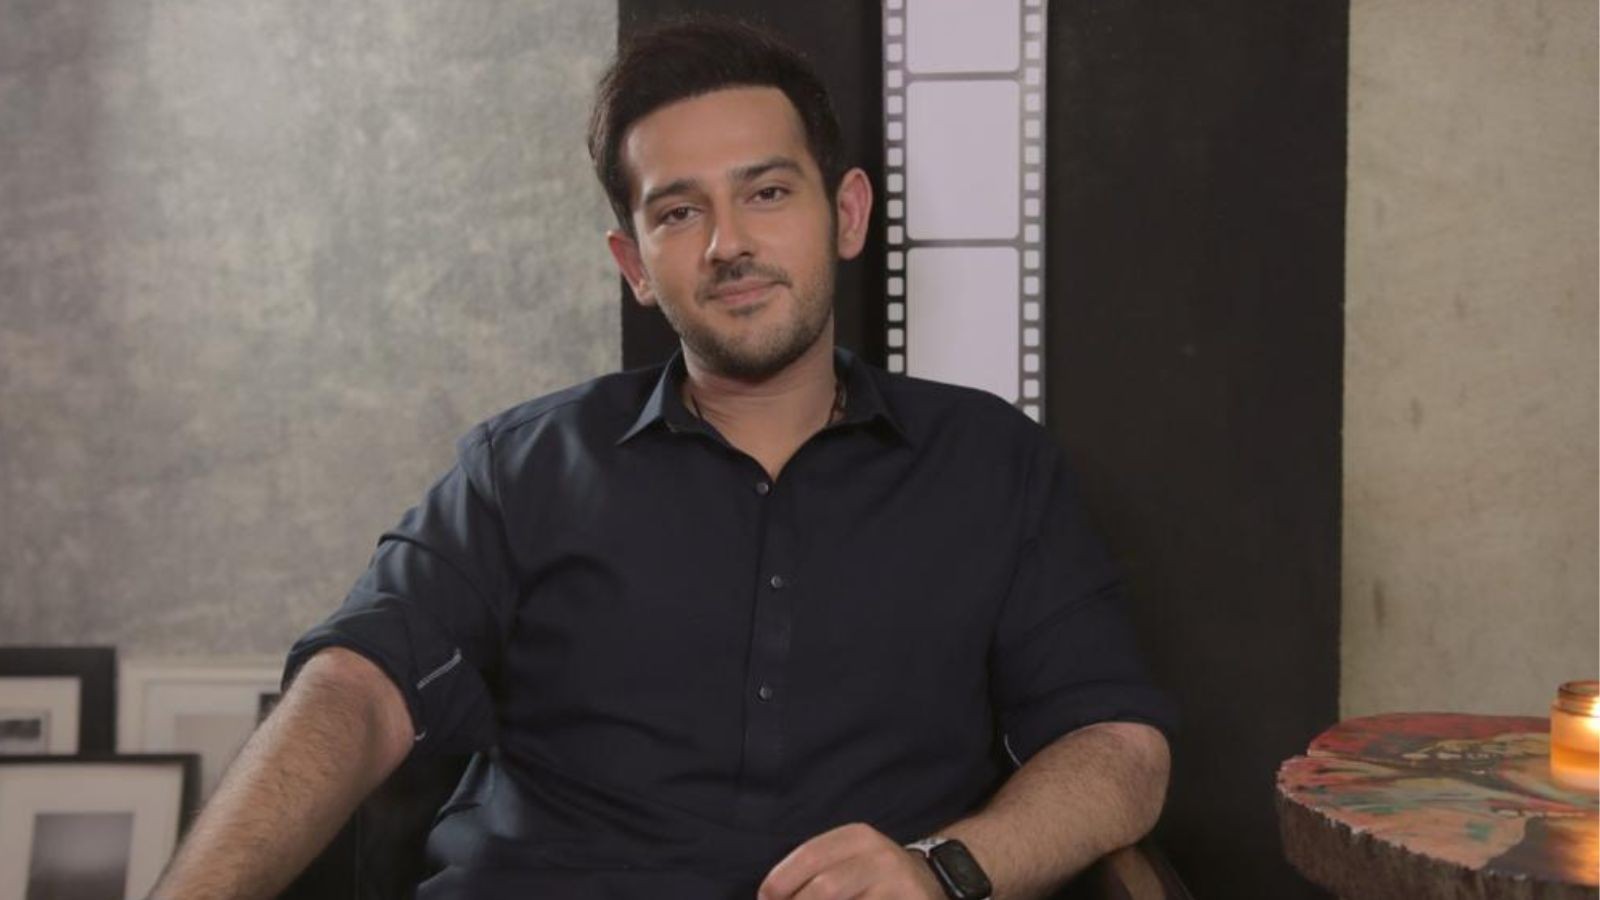 “My father and I reconnected when I was 15 years old”: Azaan Sami Khan